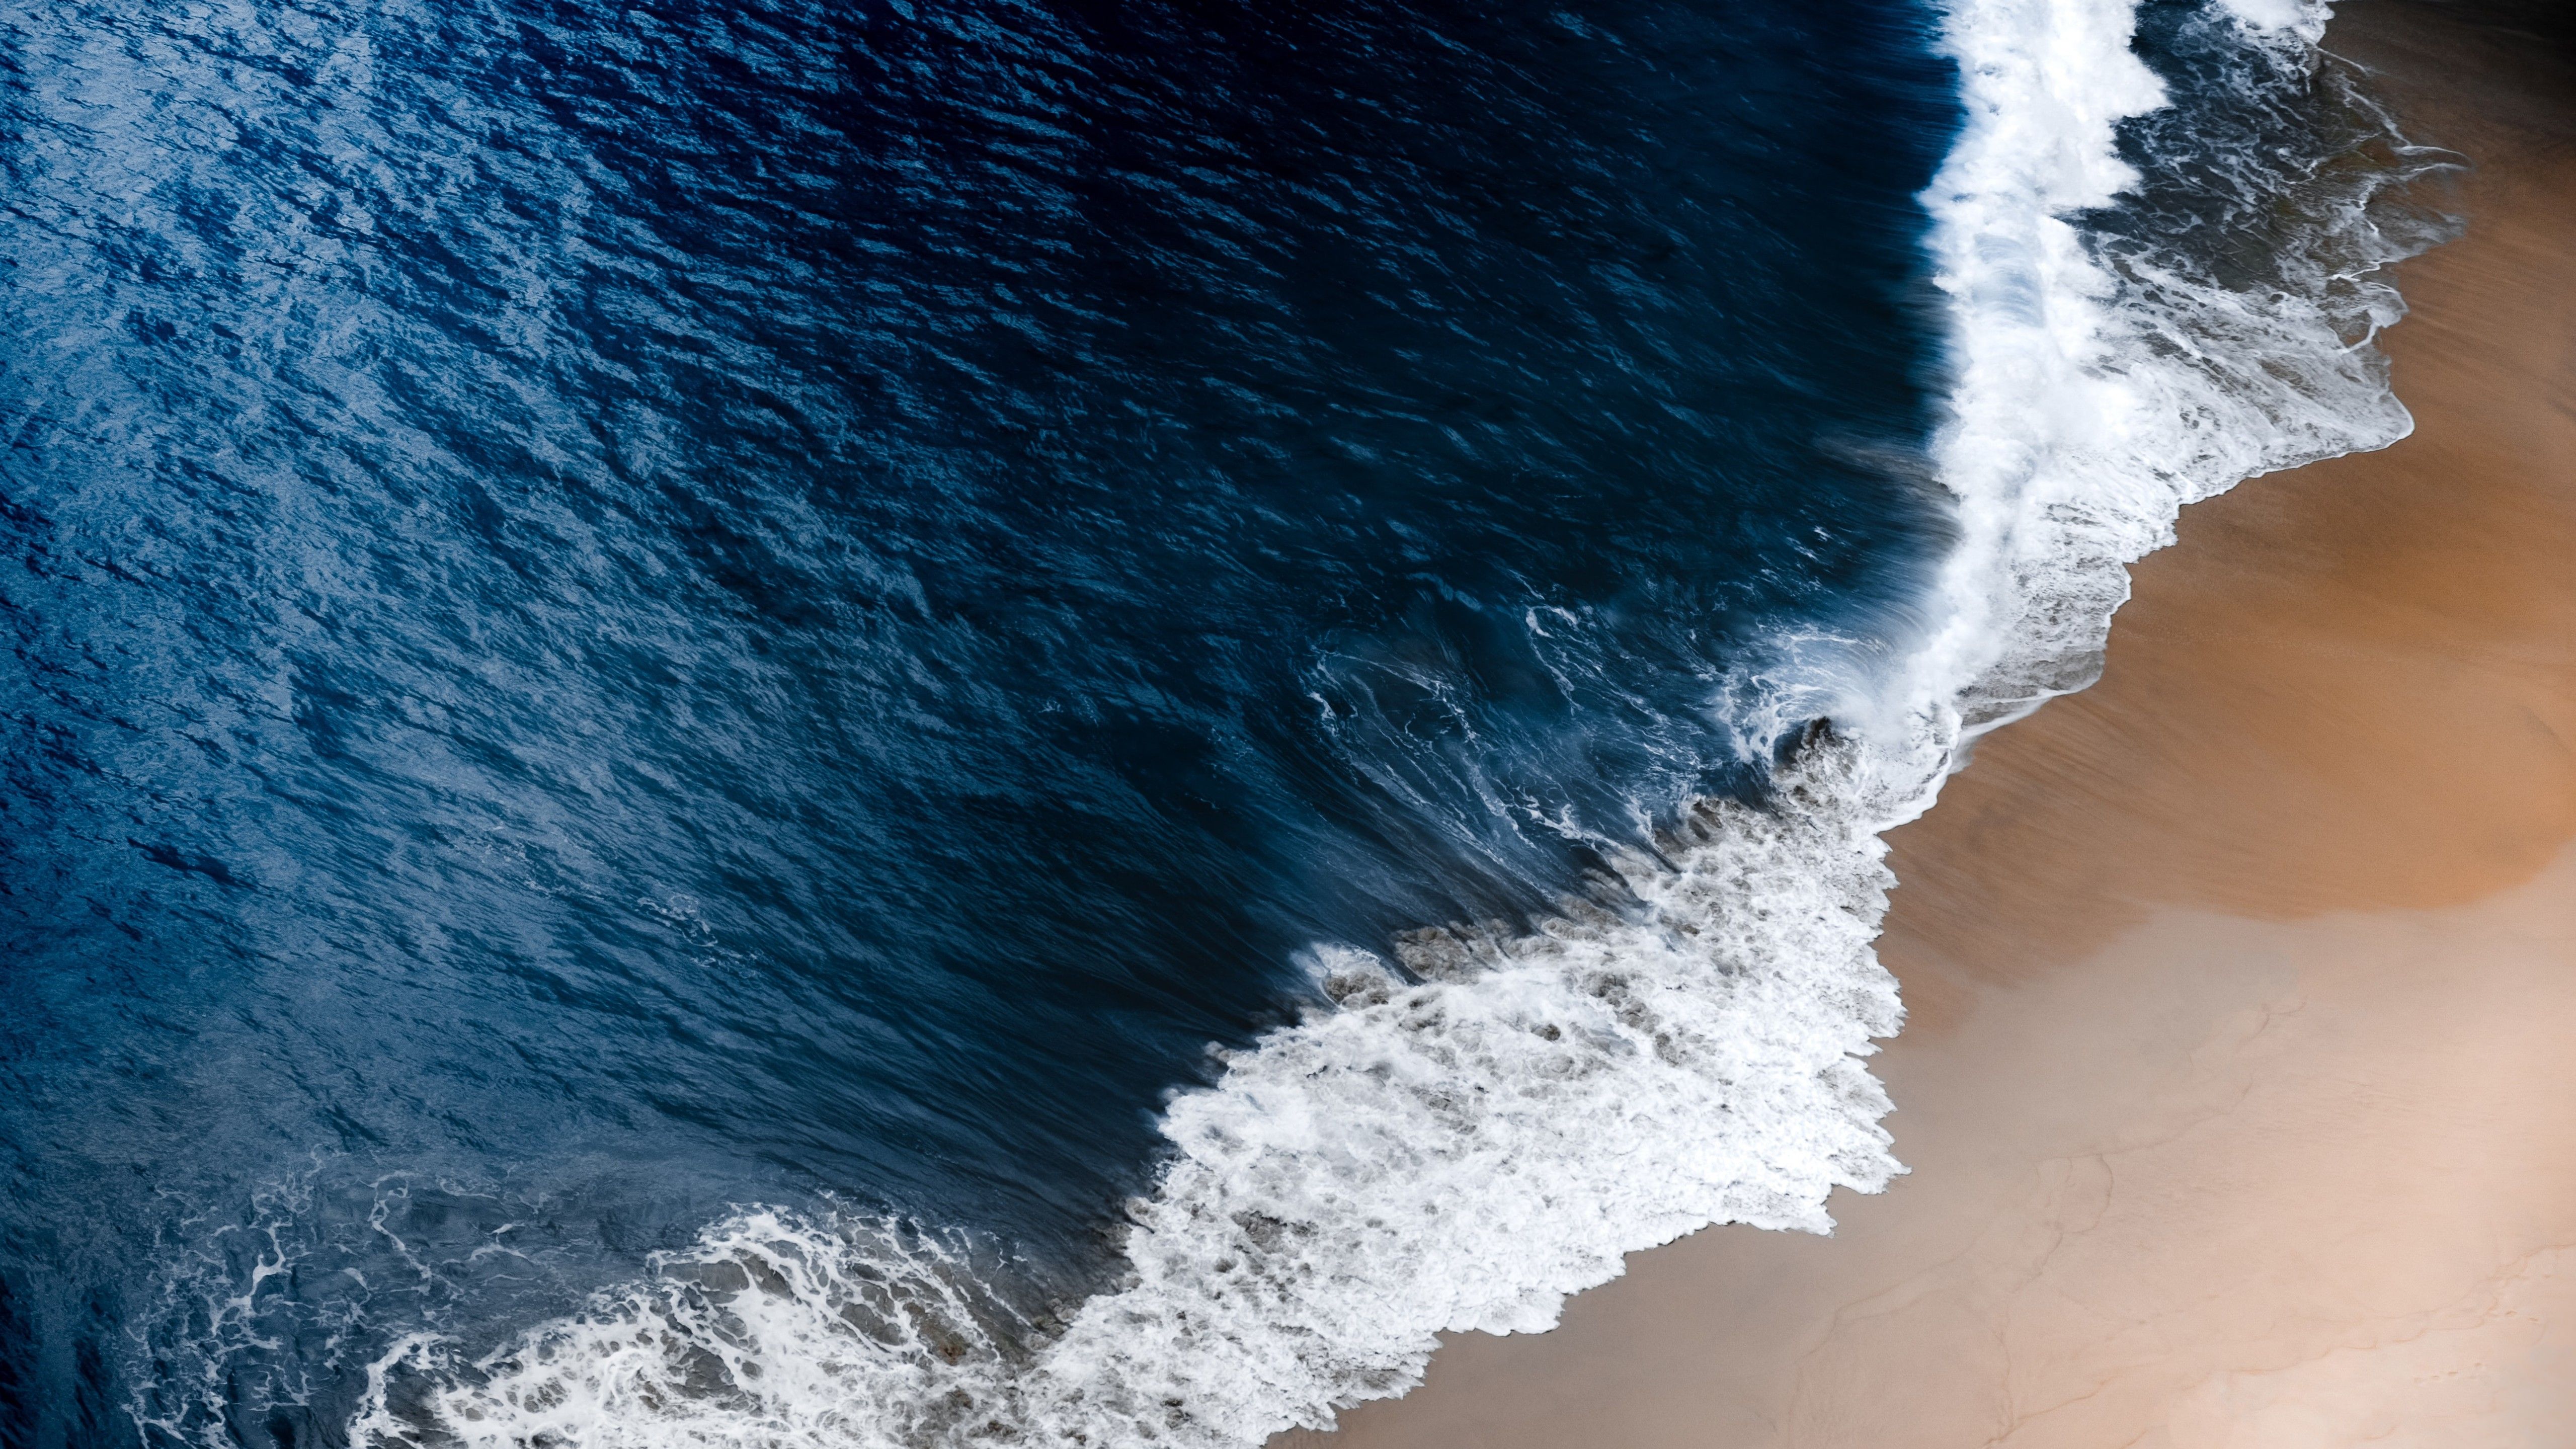 Wallpaper For Computer Aerial View Of Dark Blue Sea With White Wave During Day Time 4K 5K HD Desktop Wallpaper